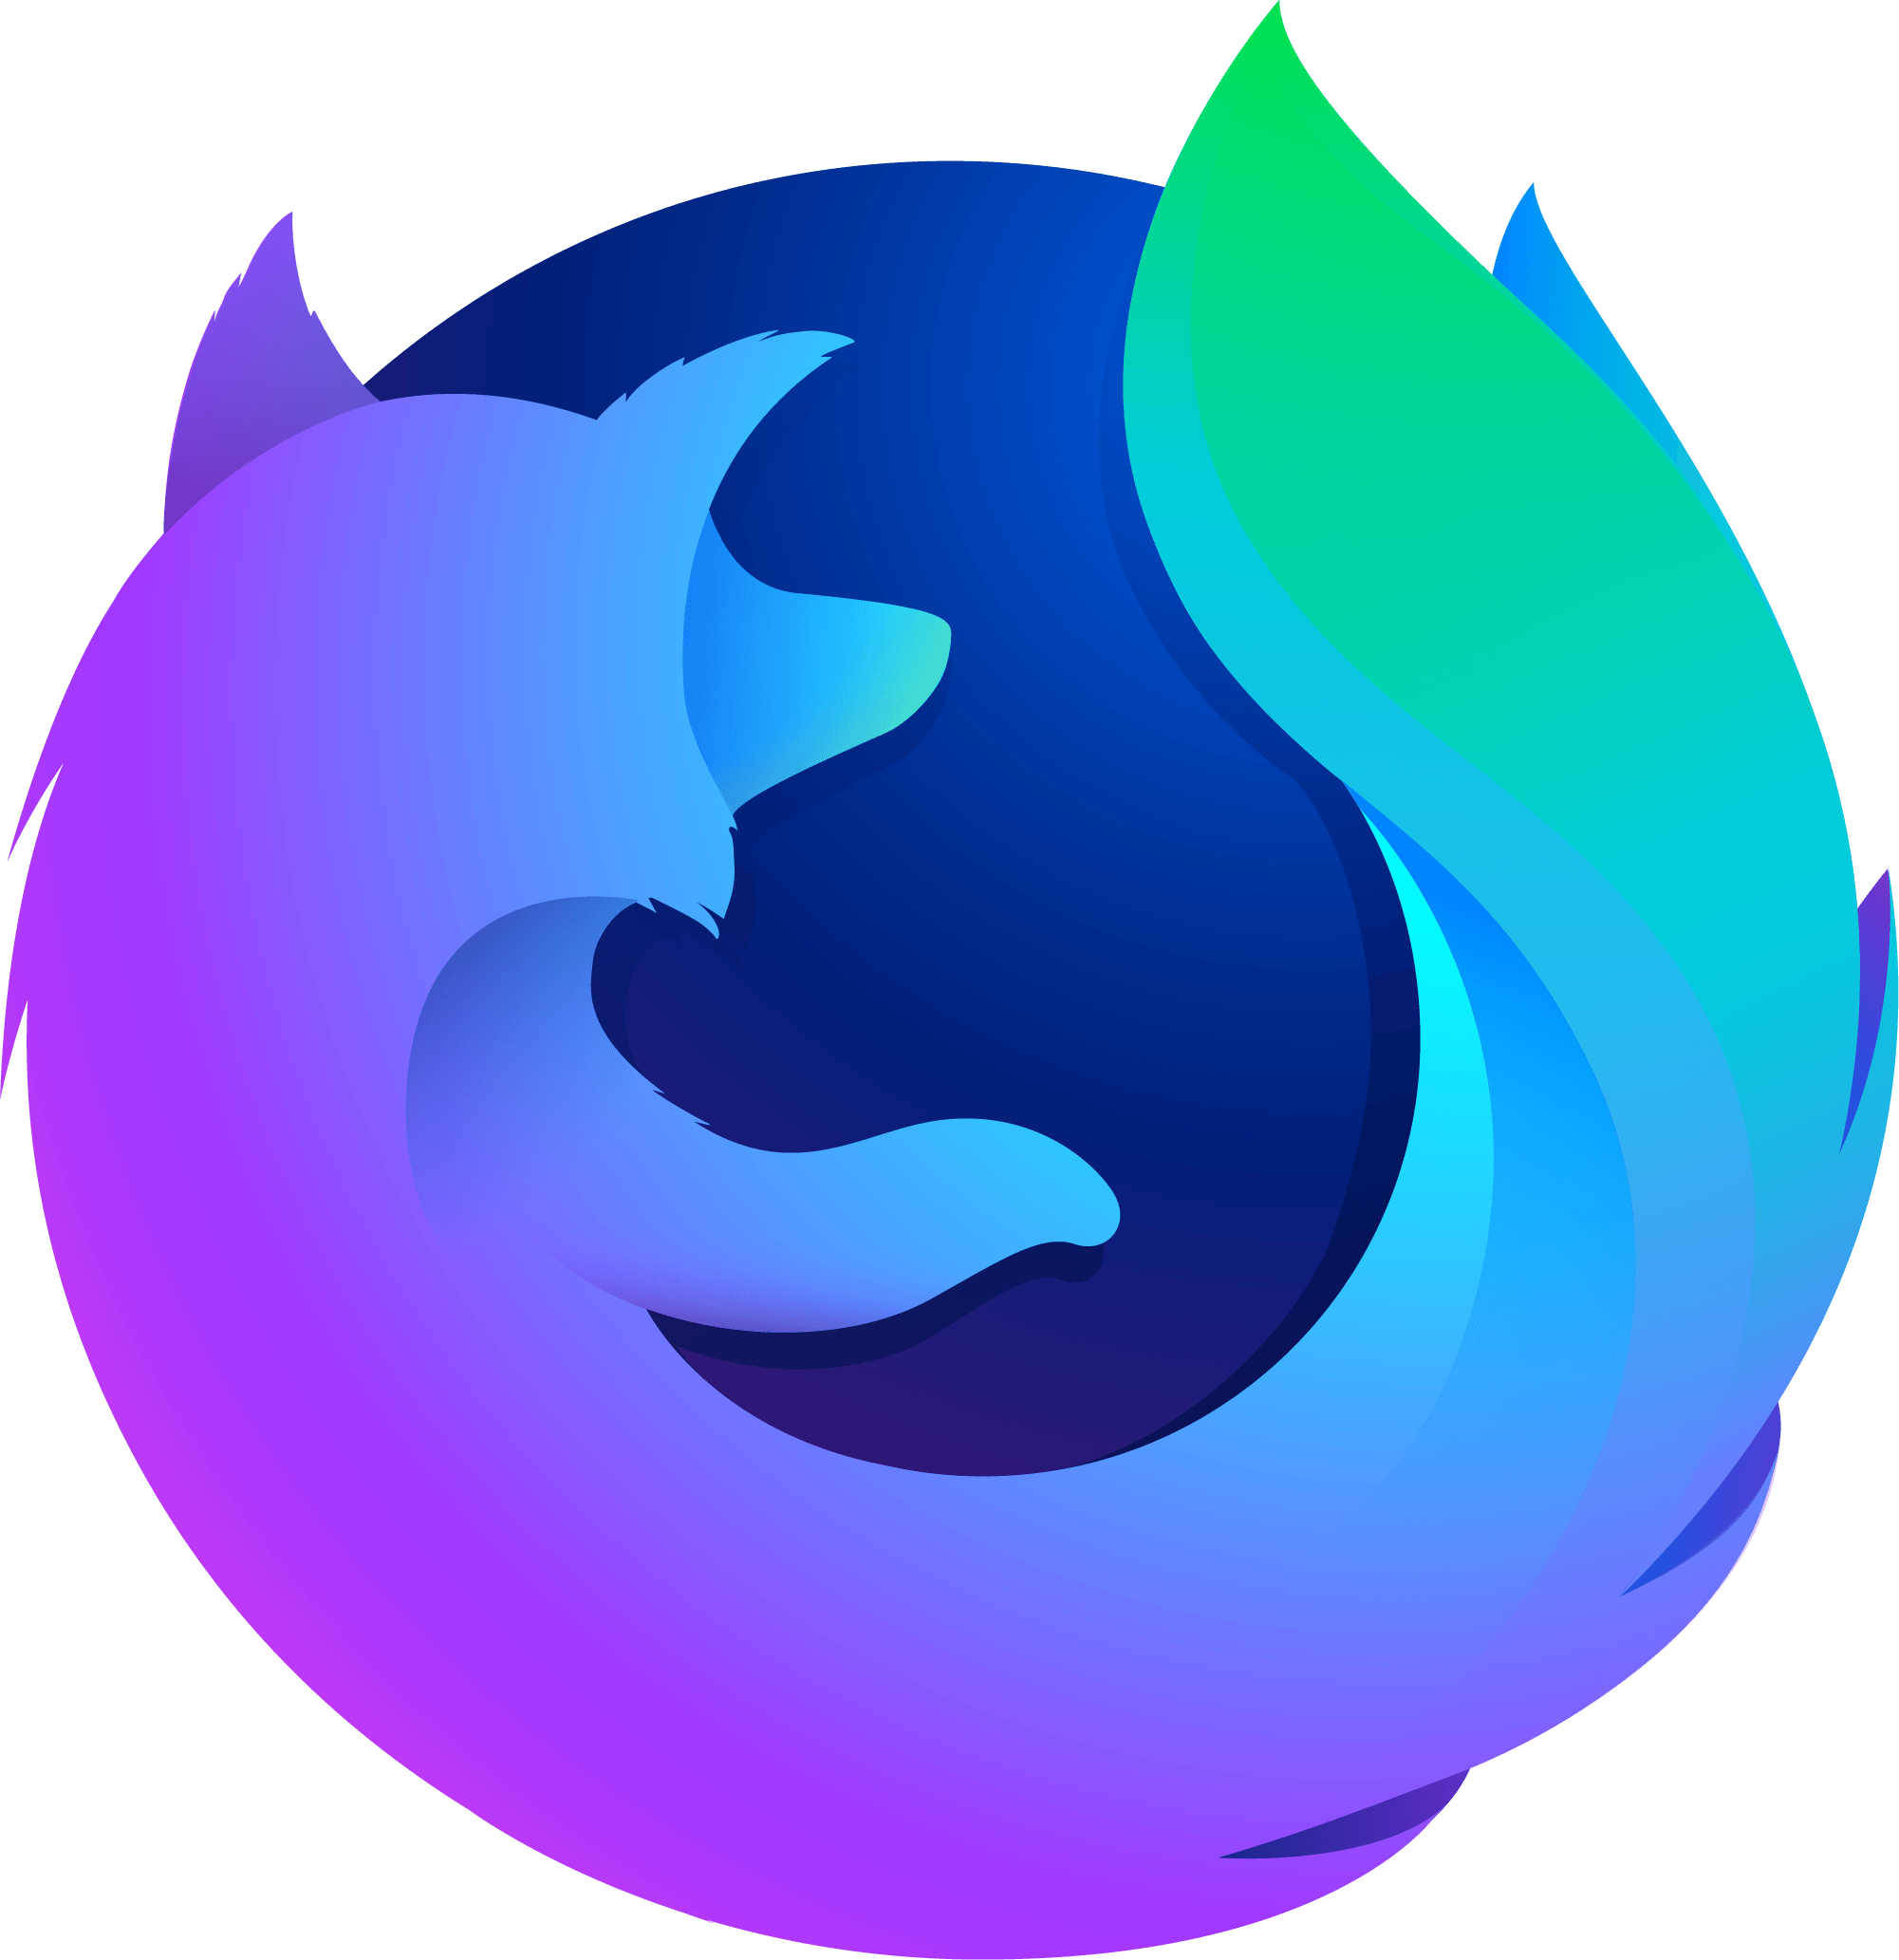 Firefox Old Logo - Product Identity Assets